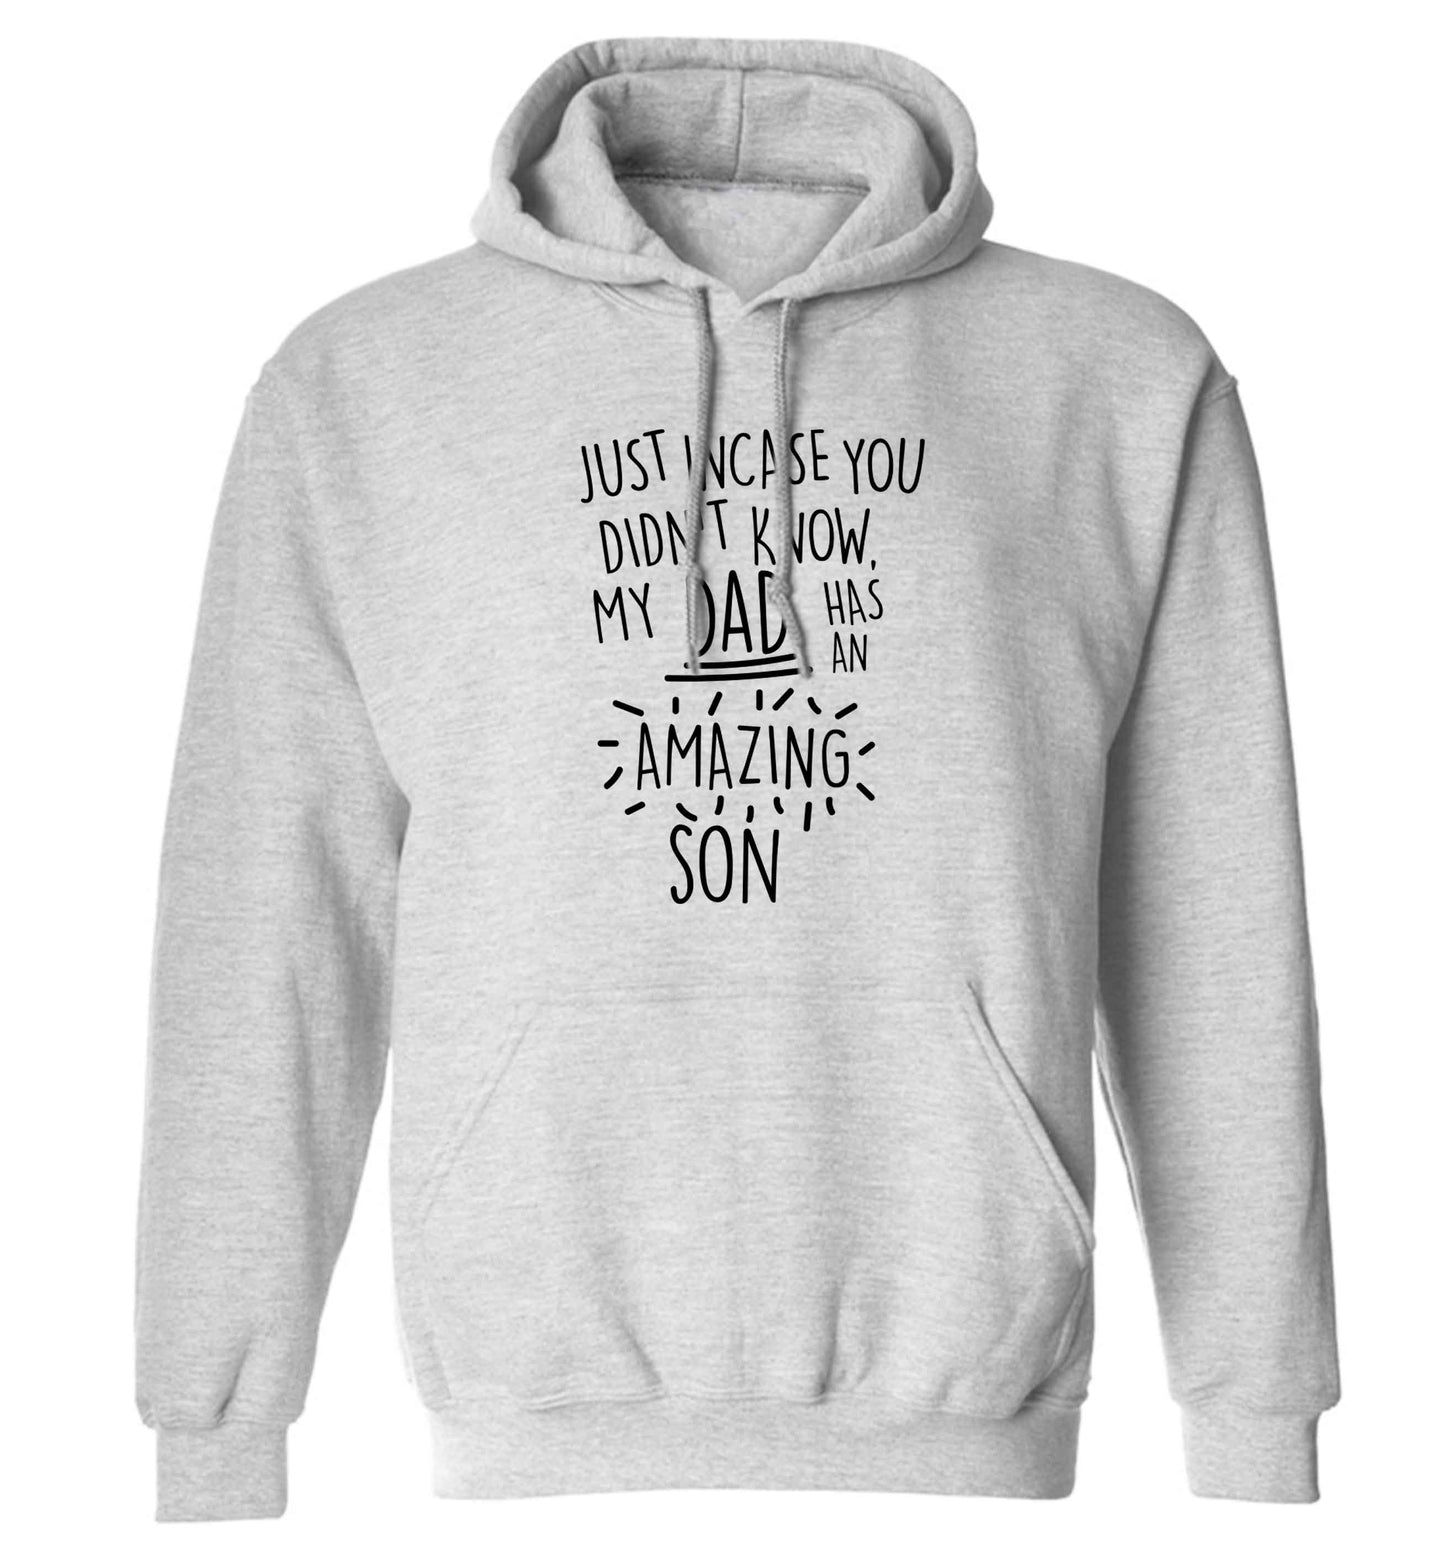 Just incase you didn't know my dad has an amazing son adults unisex grey hoodie 2XL